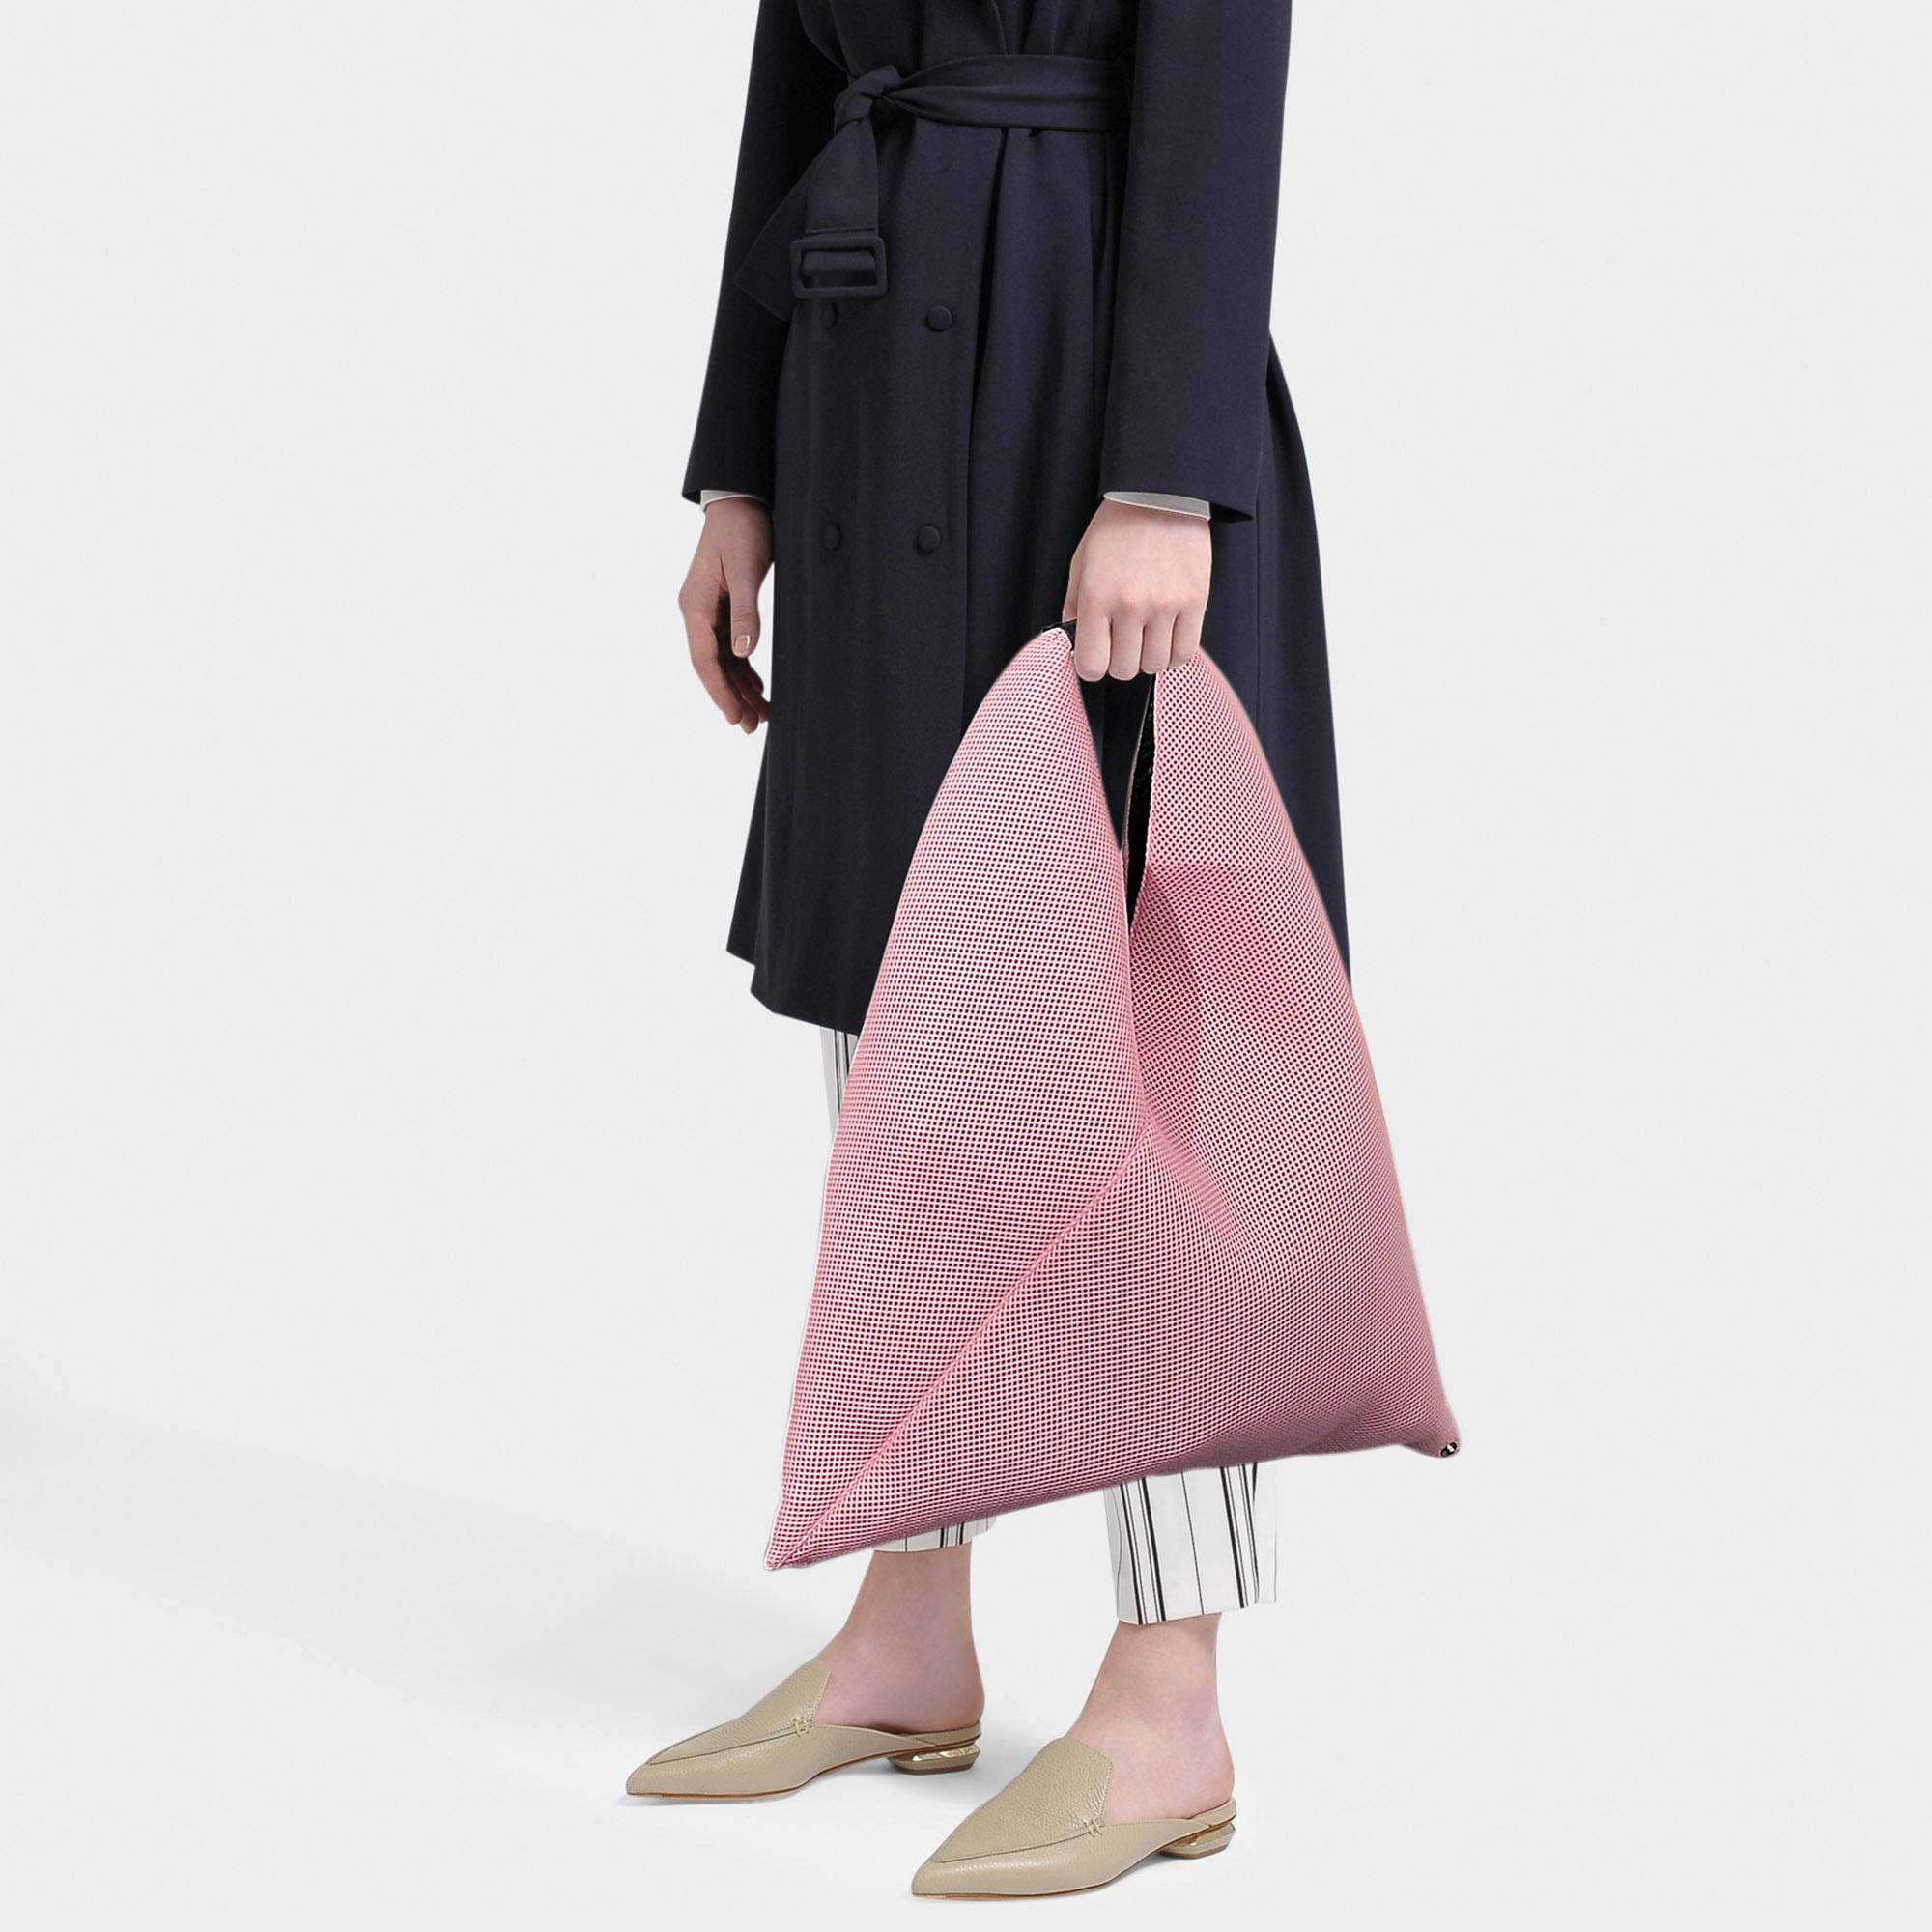 MM6 by Maison Martin Margiela Japanese Mesh Bag In Pink Stitch | Lyst